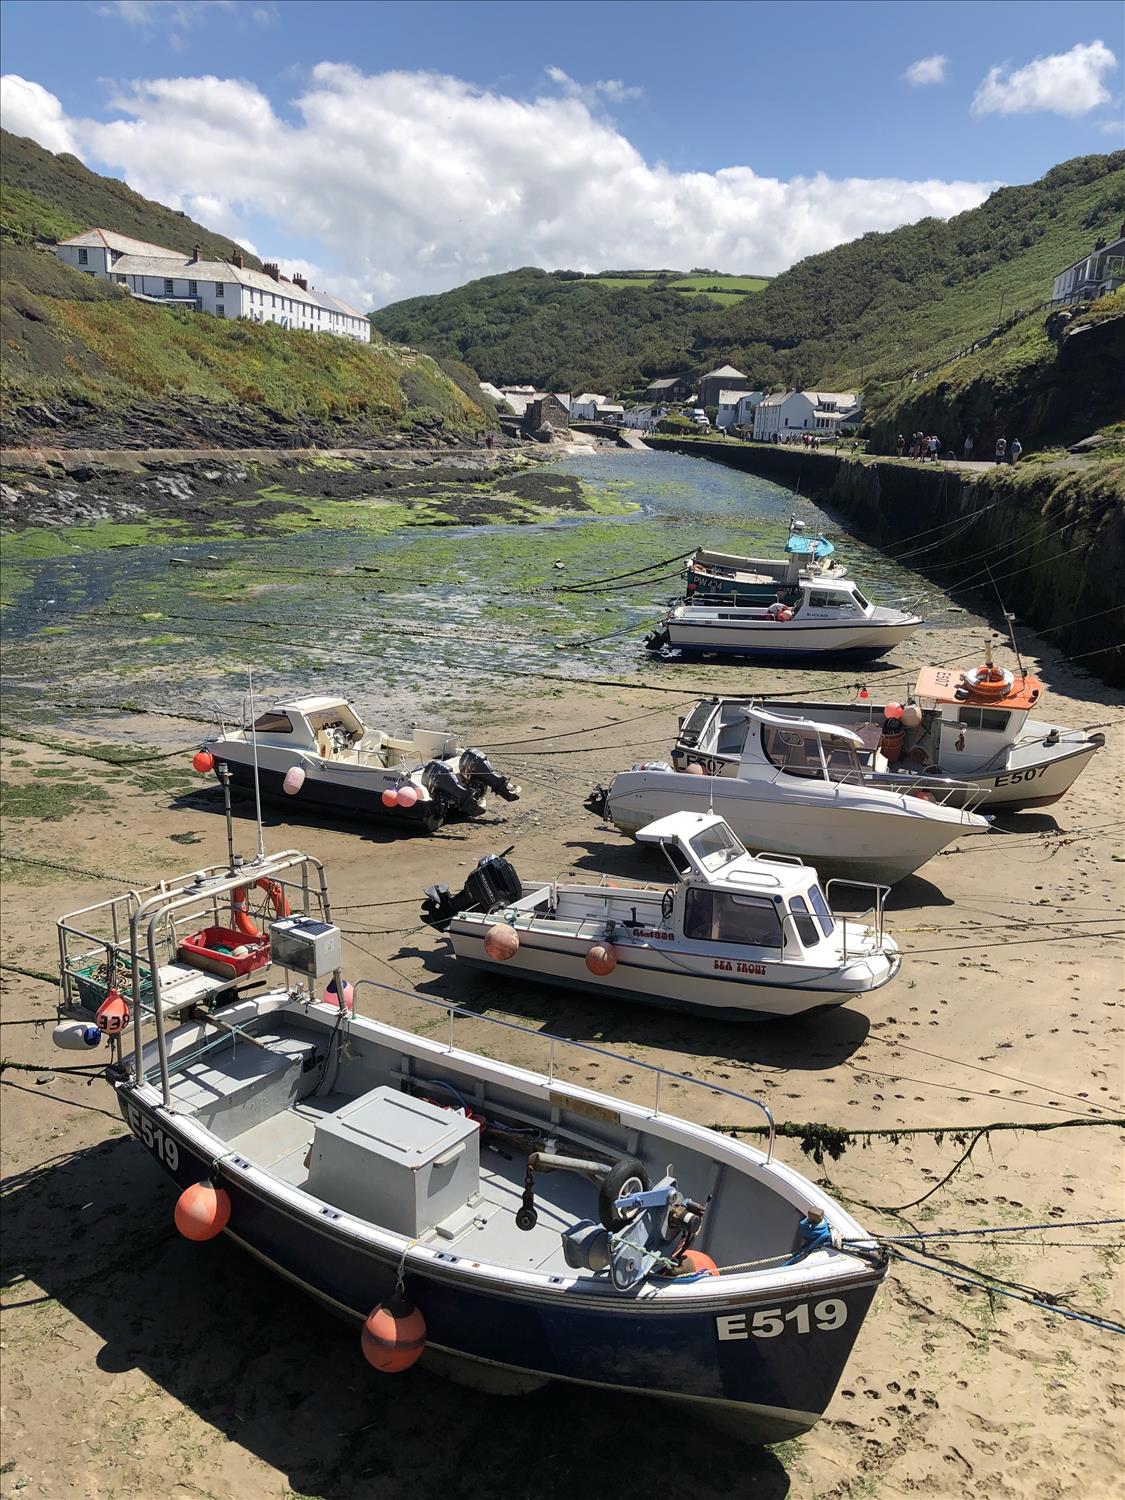 Boats beached with the tide out at Boscastle harbour, Cornwall, with white stone cottages and the hills of the Valency Valley in the background